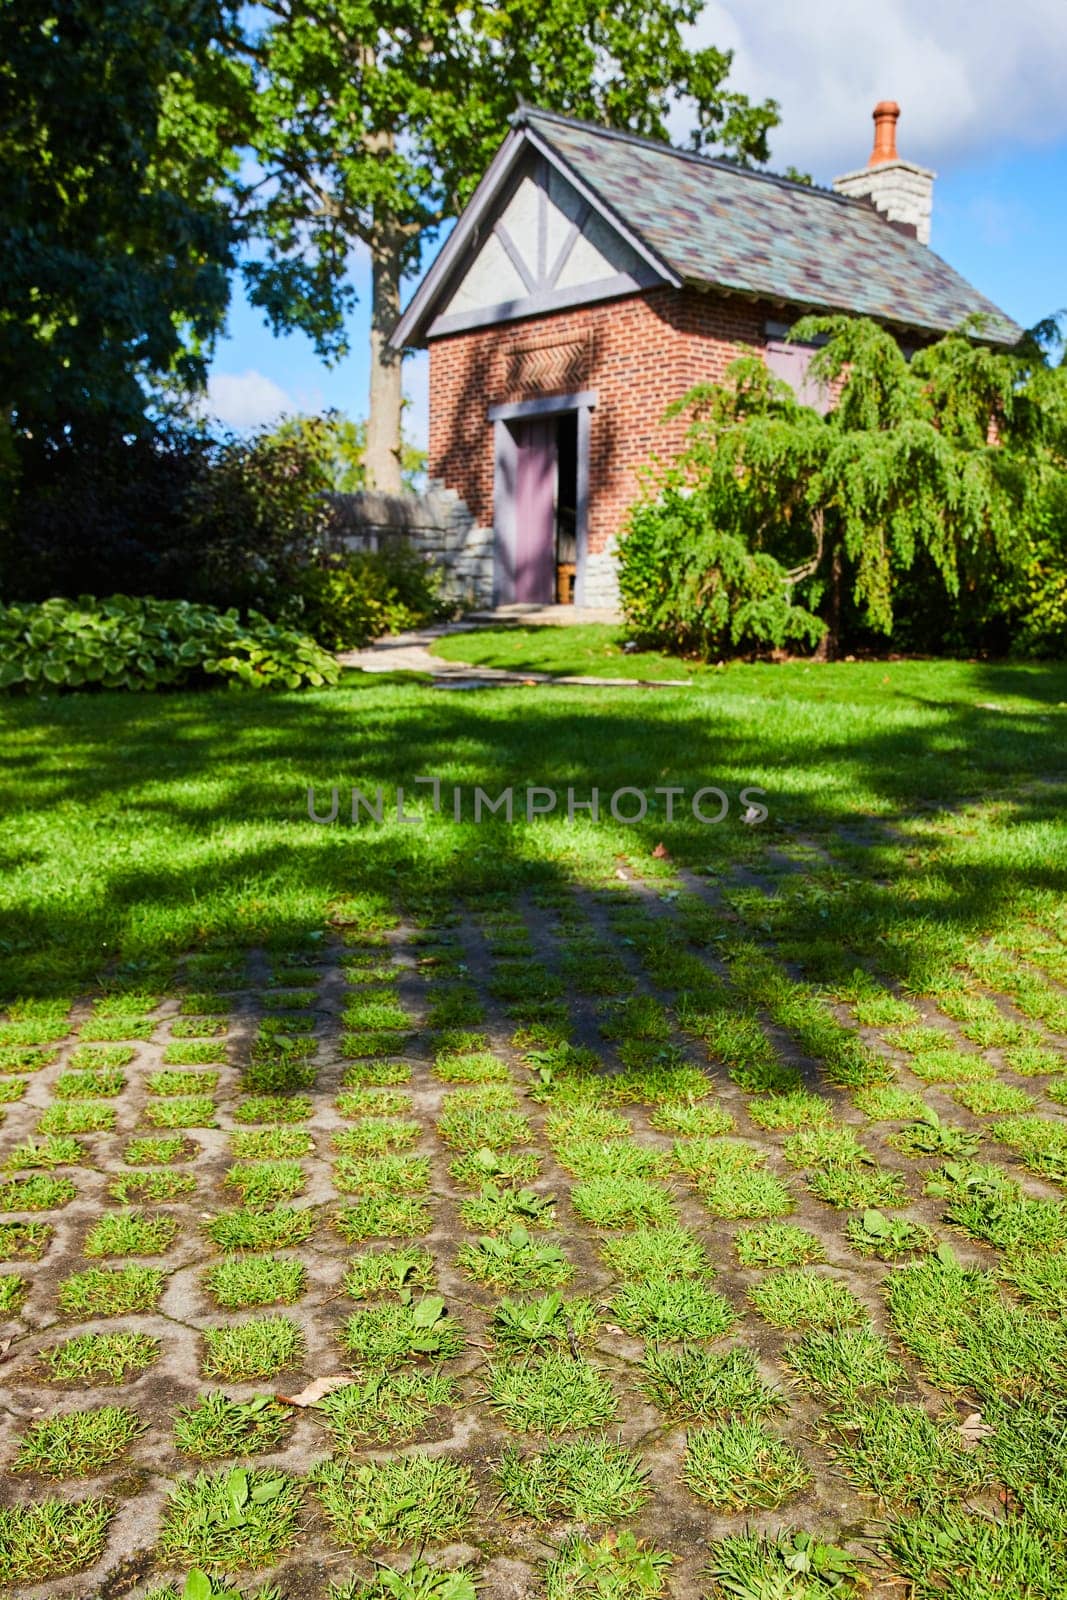 Charming Brick Cottage with Purple Door and Cobblestone Path in Lush Greenery by njproductions